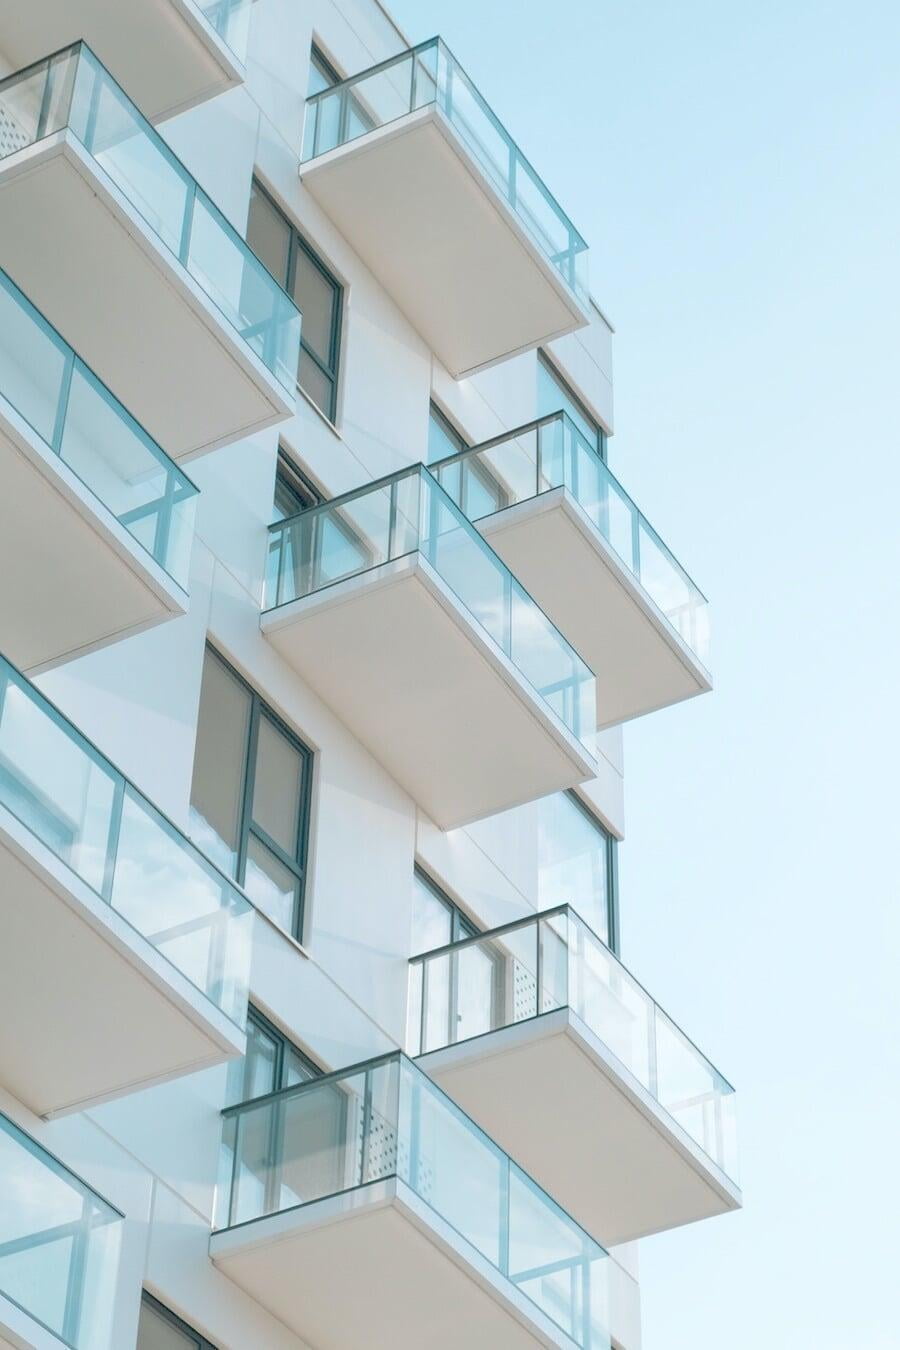 White multifamily apartment exterior with glass balconies